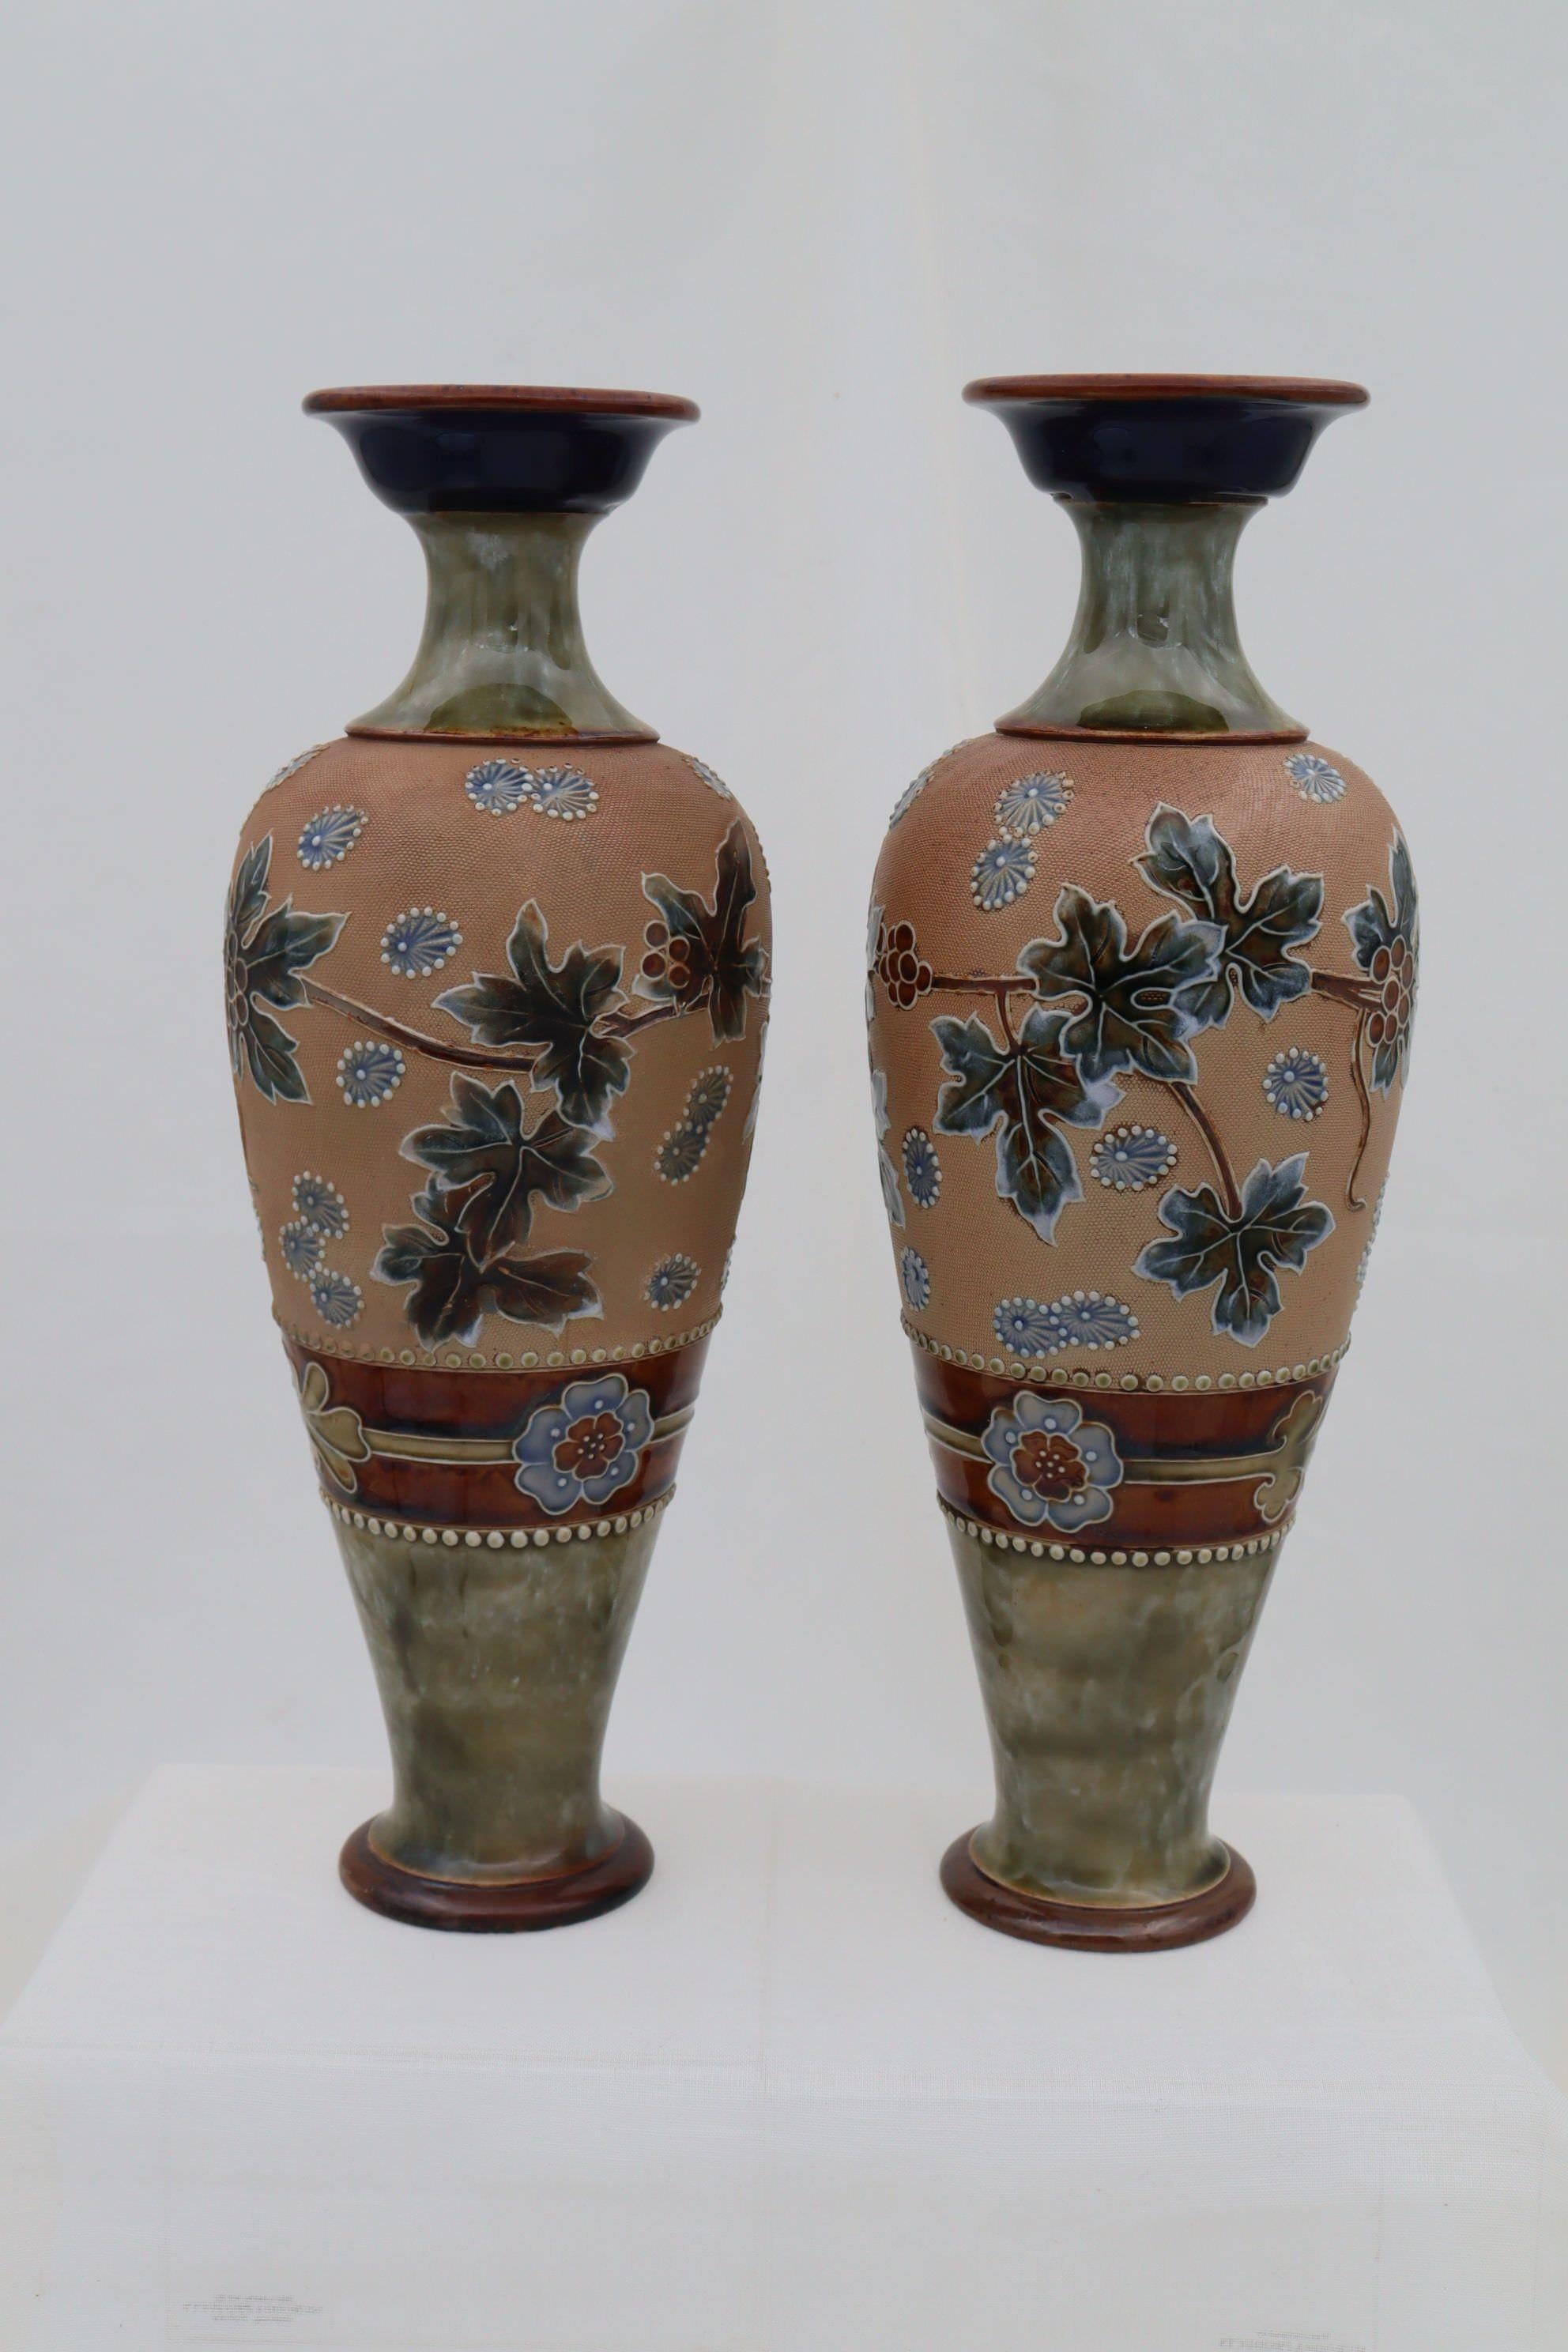 This pair of baluster shaped Royal Doulton vases are decorated in the Chine Ware manner patented by Doulton. Doulton and Slaters patent, also known as Chine Ware was a decoration process that involved pressing pieces of linen, lace, net or other